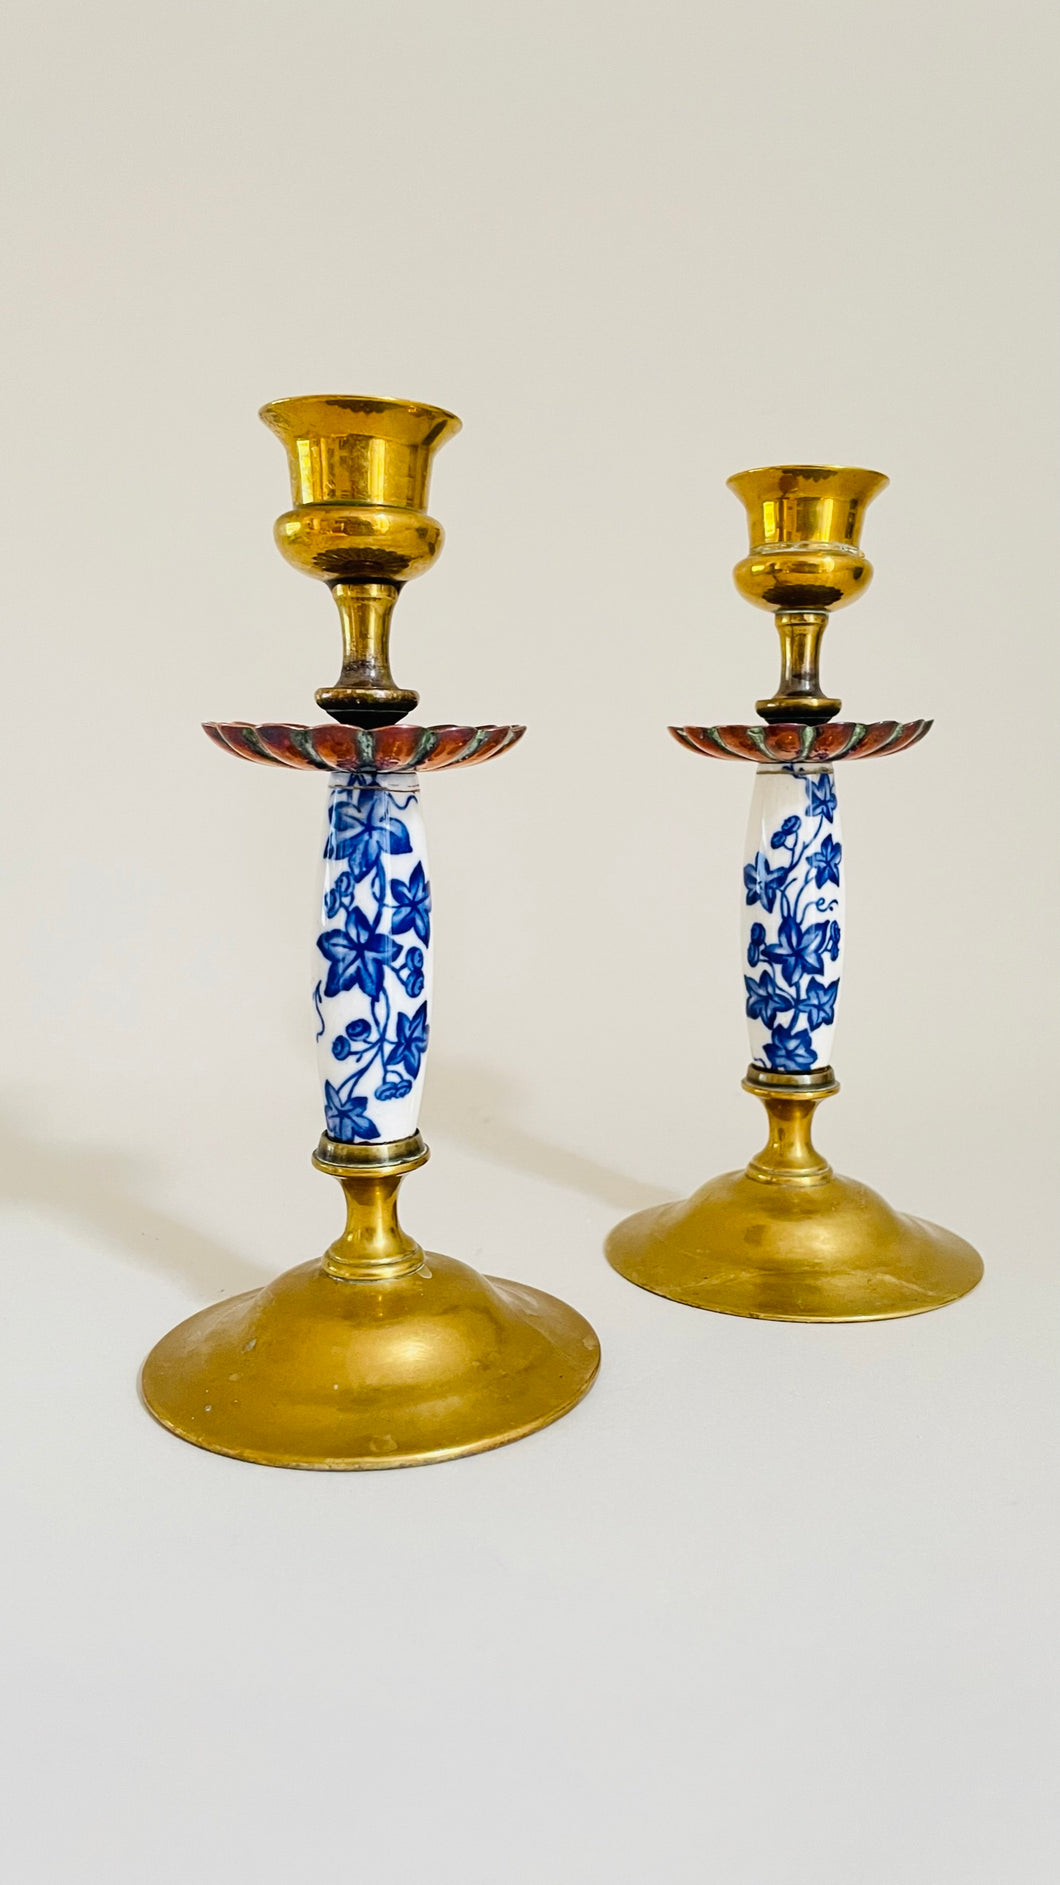 Pair of Vintage Brass and Porcelain Candlesticks